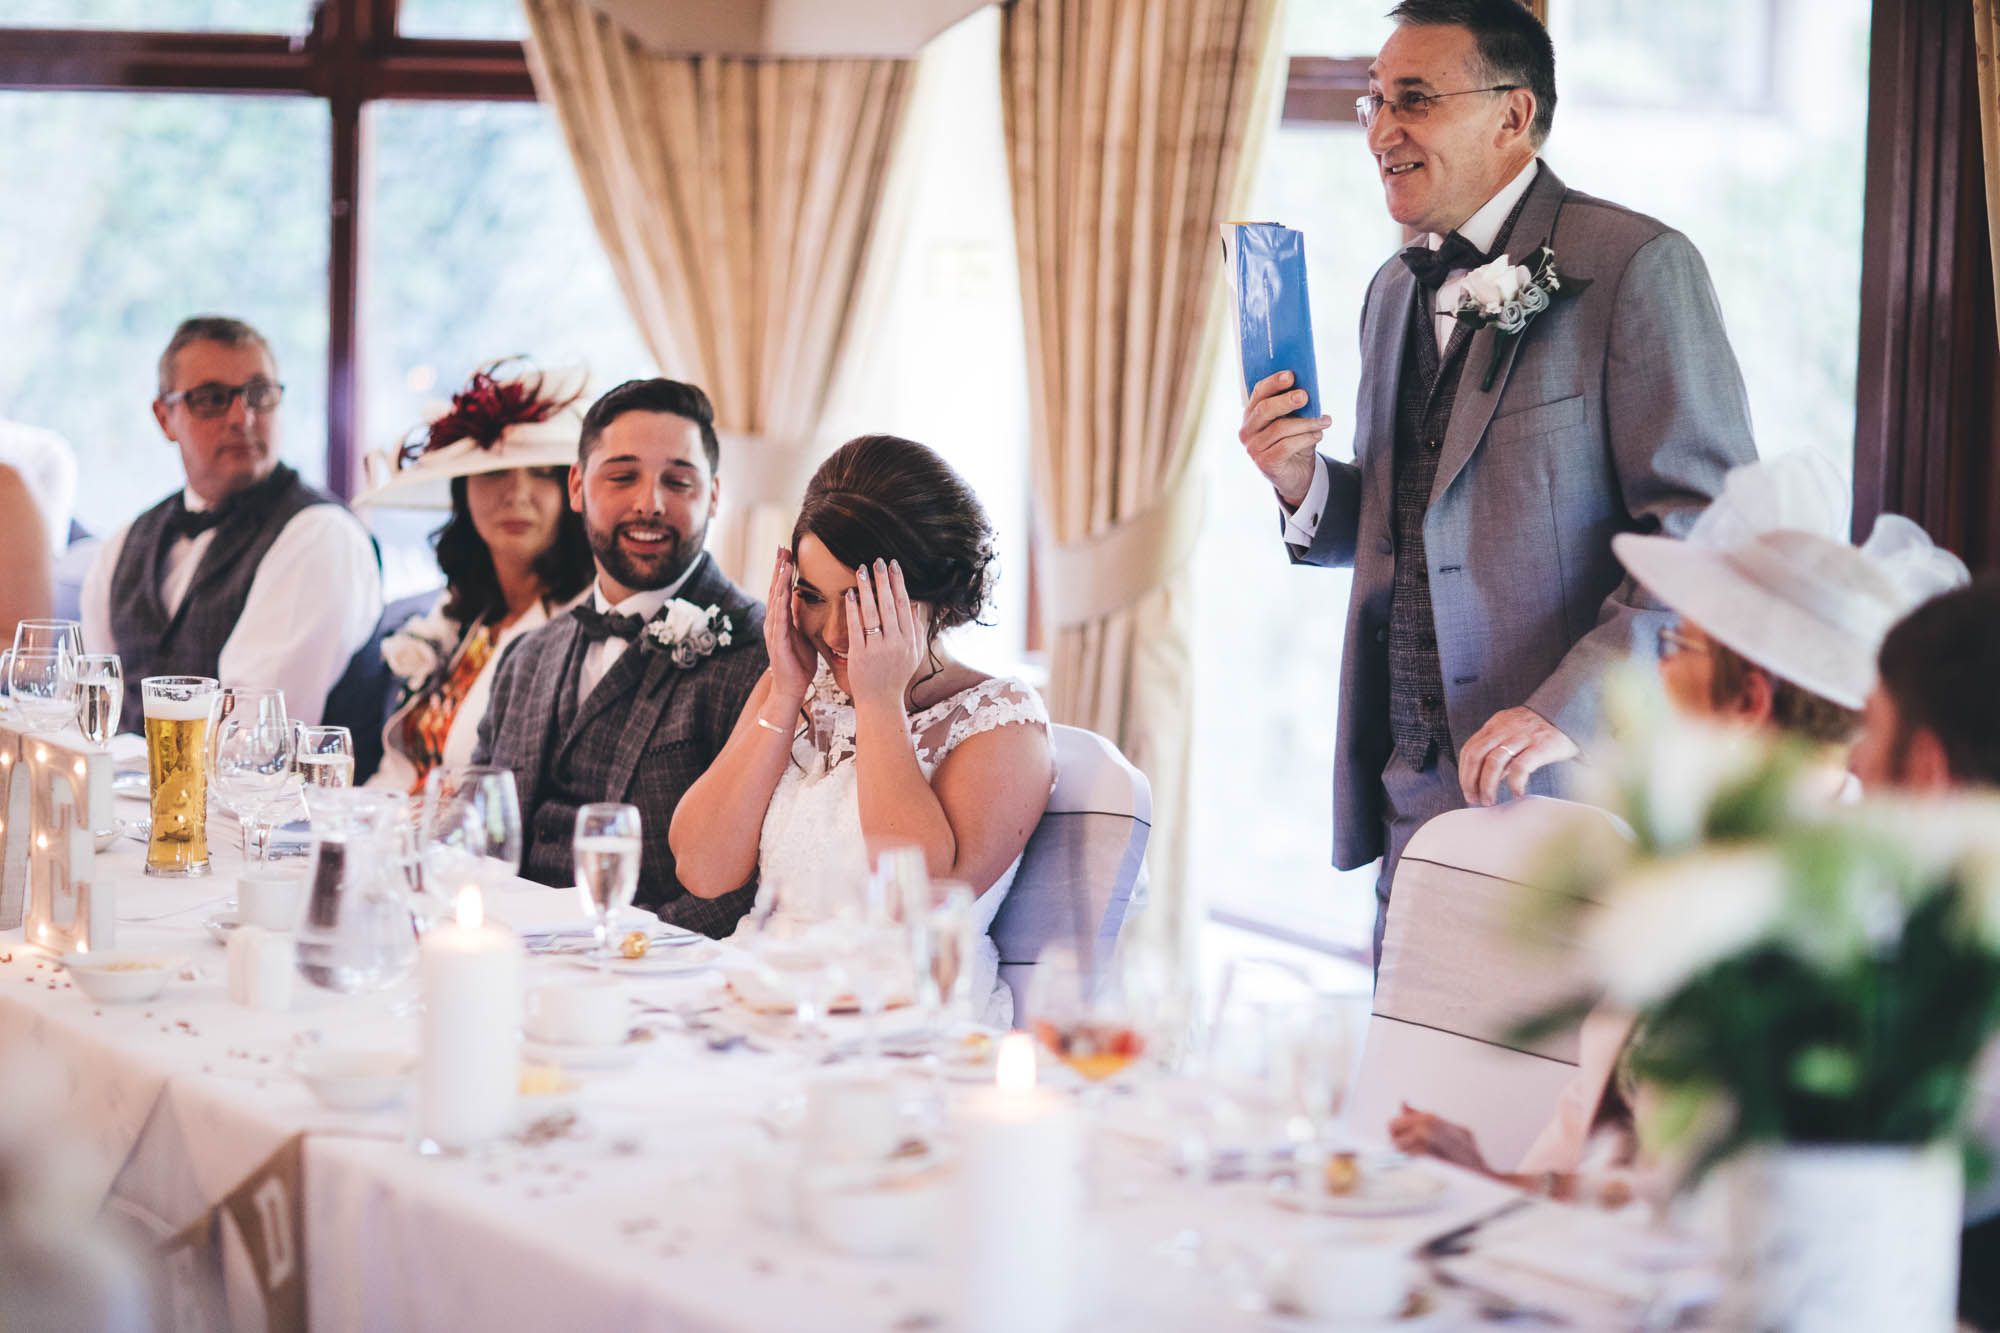 Father of Bride embarrasses Bride during speech at top table